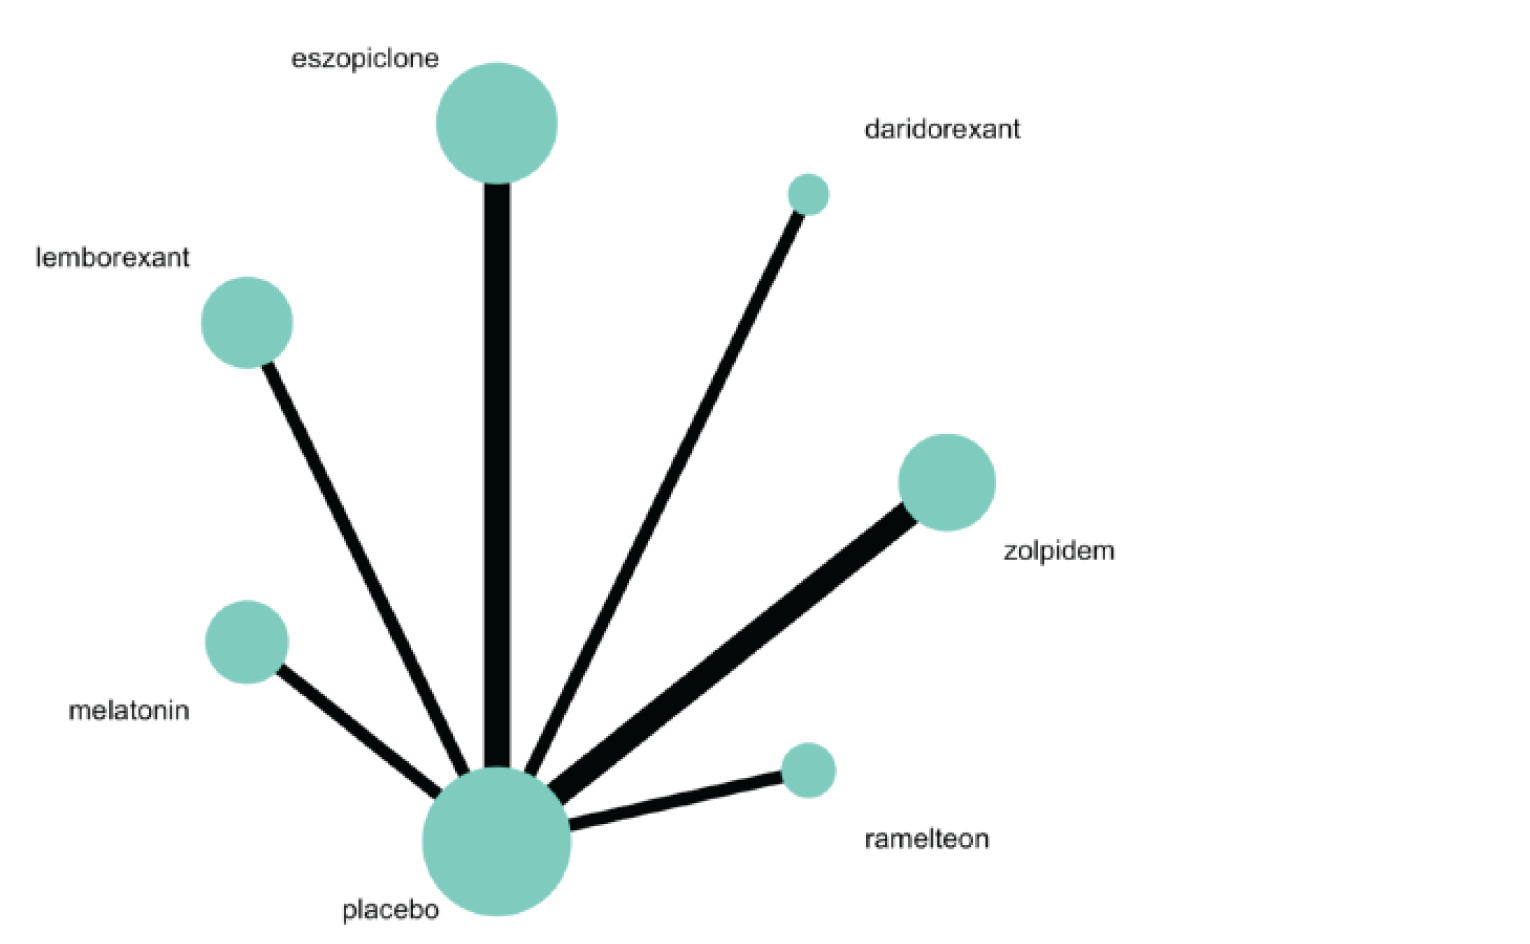 The network consists of a main placebo node (the biggest node) connected to 6 nodes for each intervention. There are no closed loops.